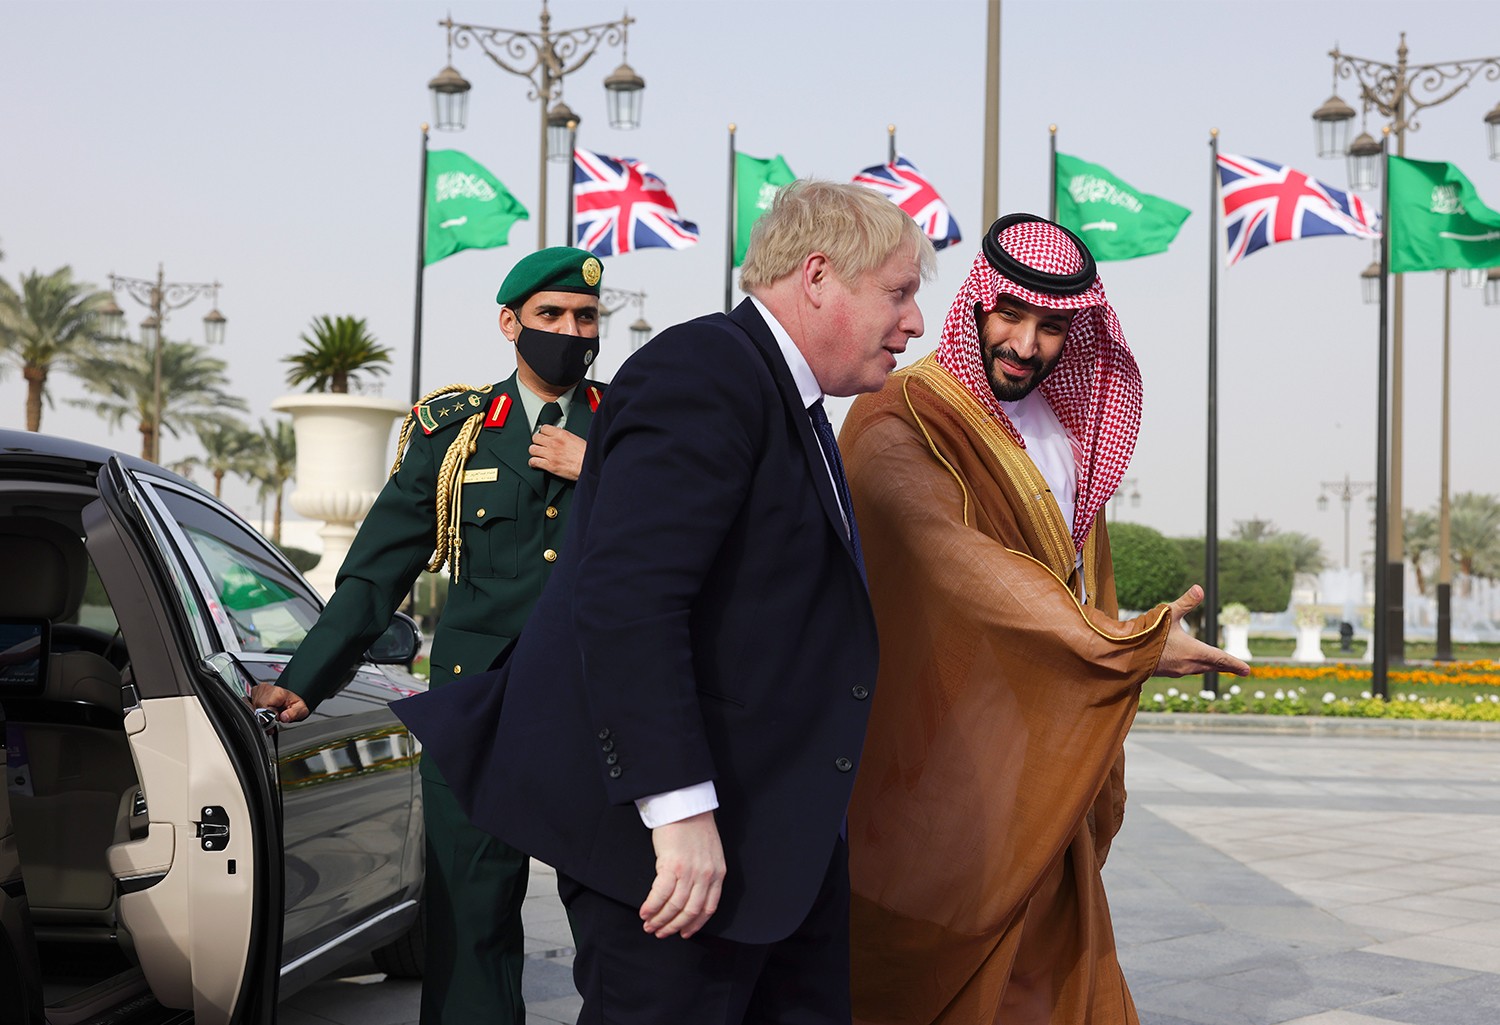 Turning a blind eye to human rights violations: Why Britain is courting Saudi Arabia’s Crown Prince MBS